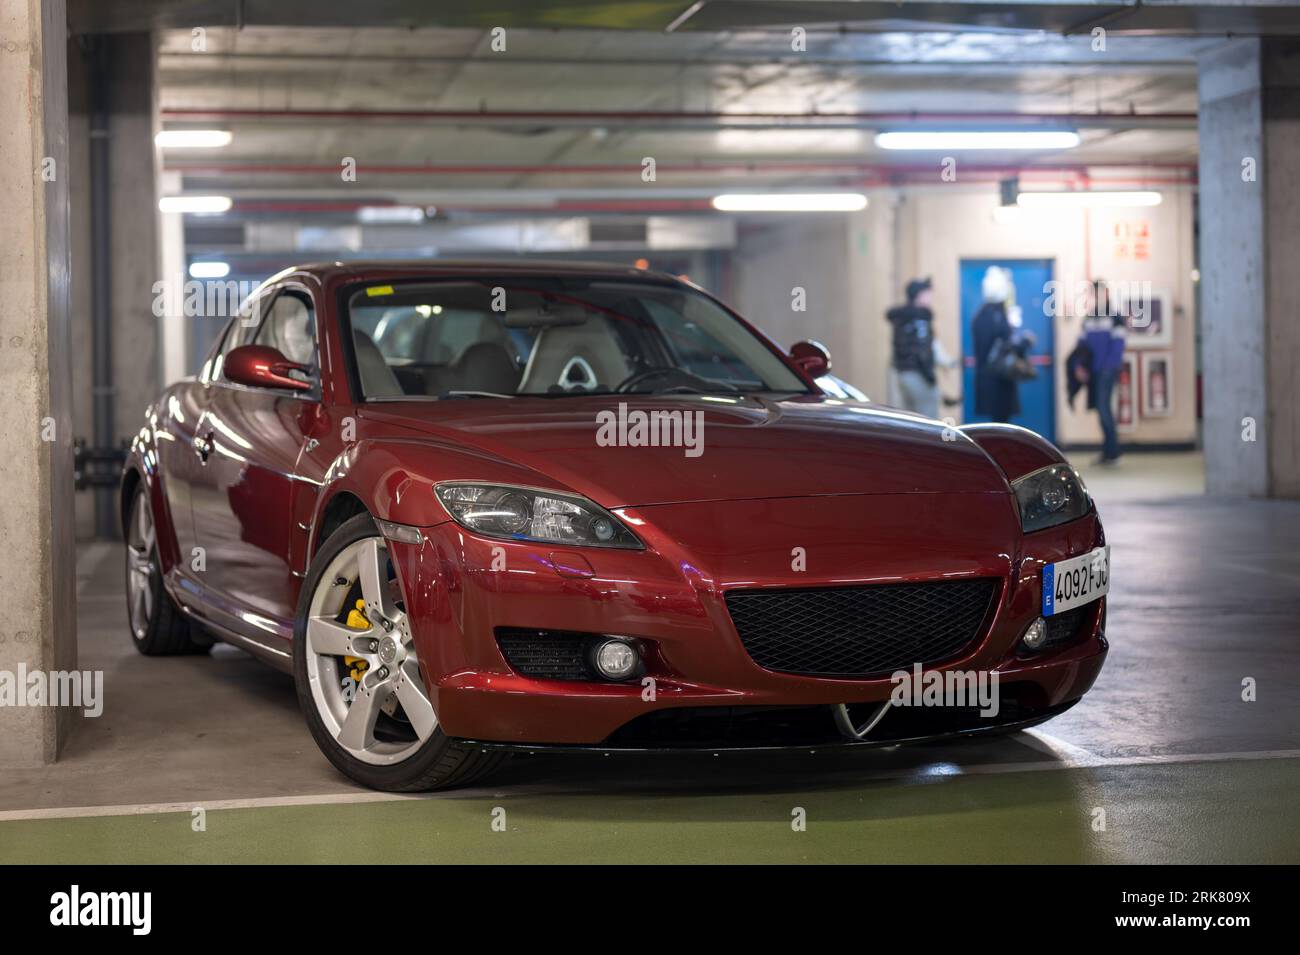 A nice tuned maroon red Mazda RX8 in the dark garage Stock Photo